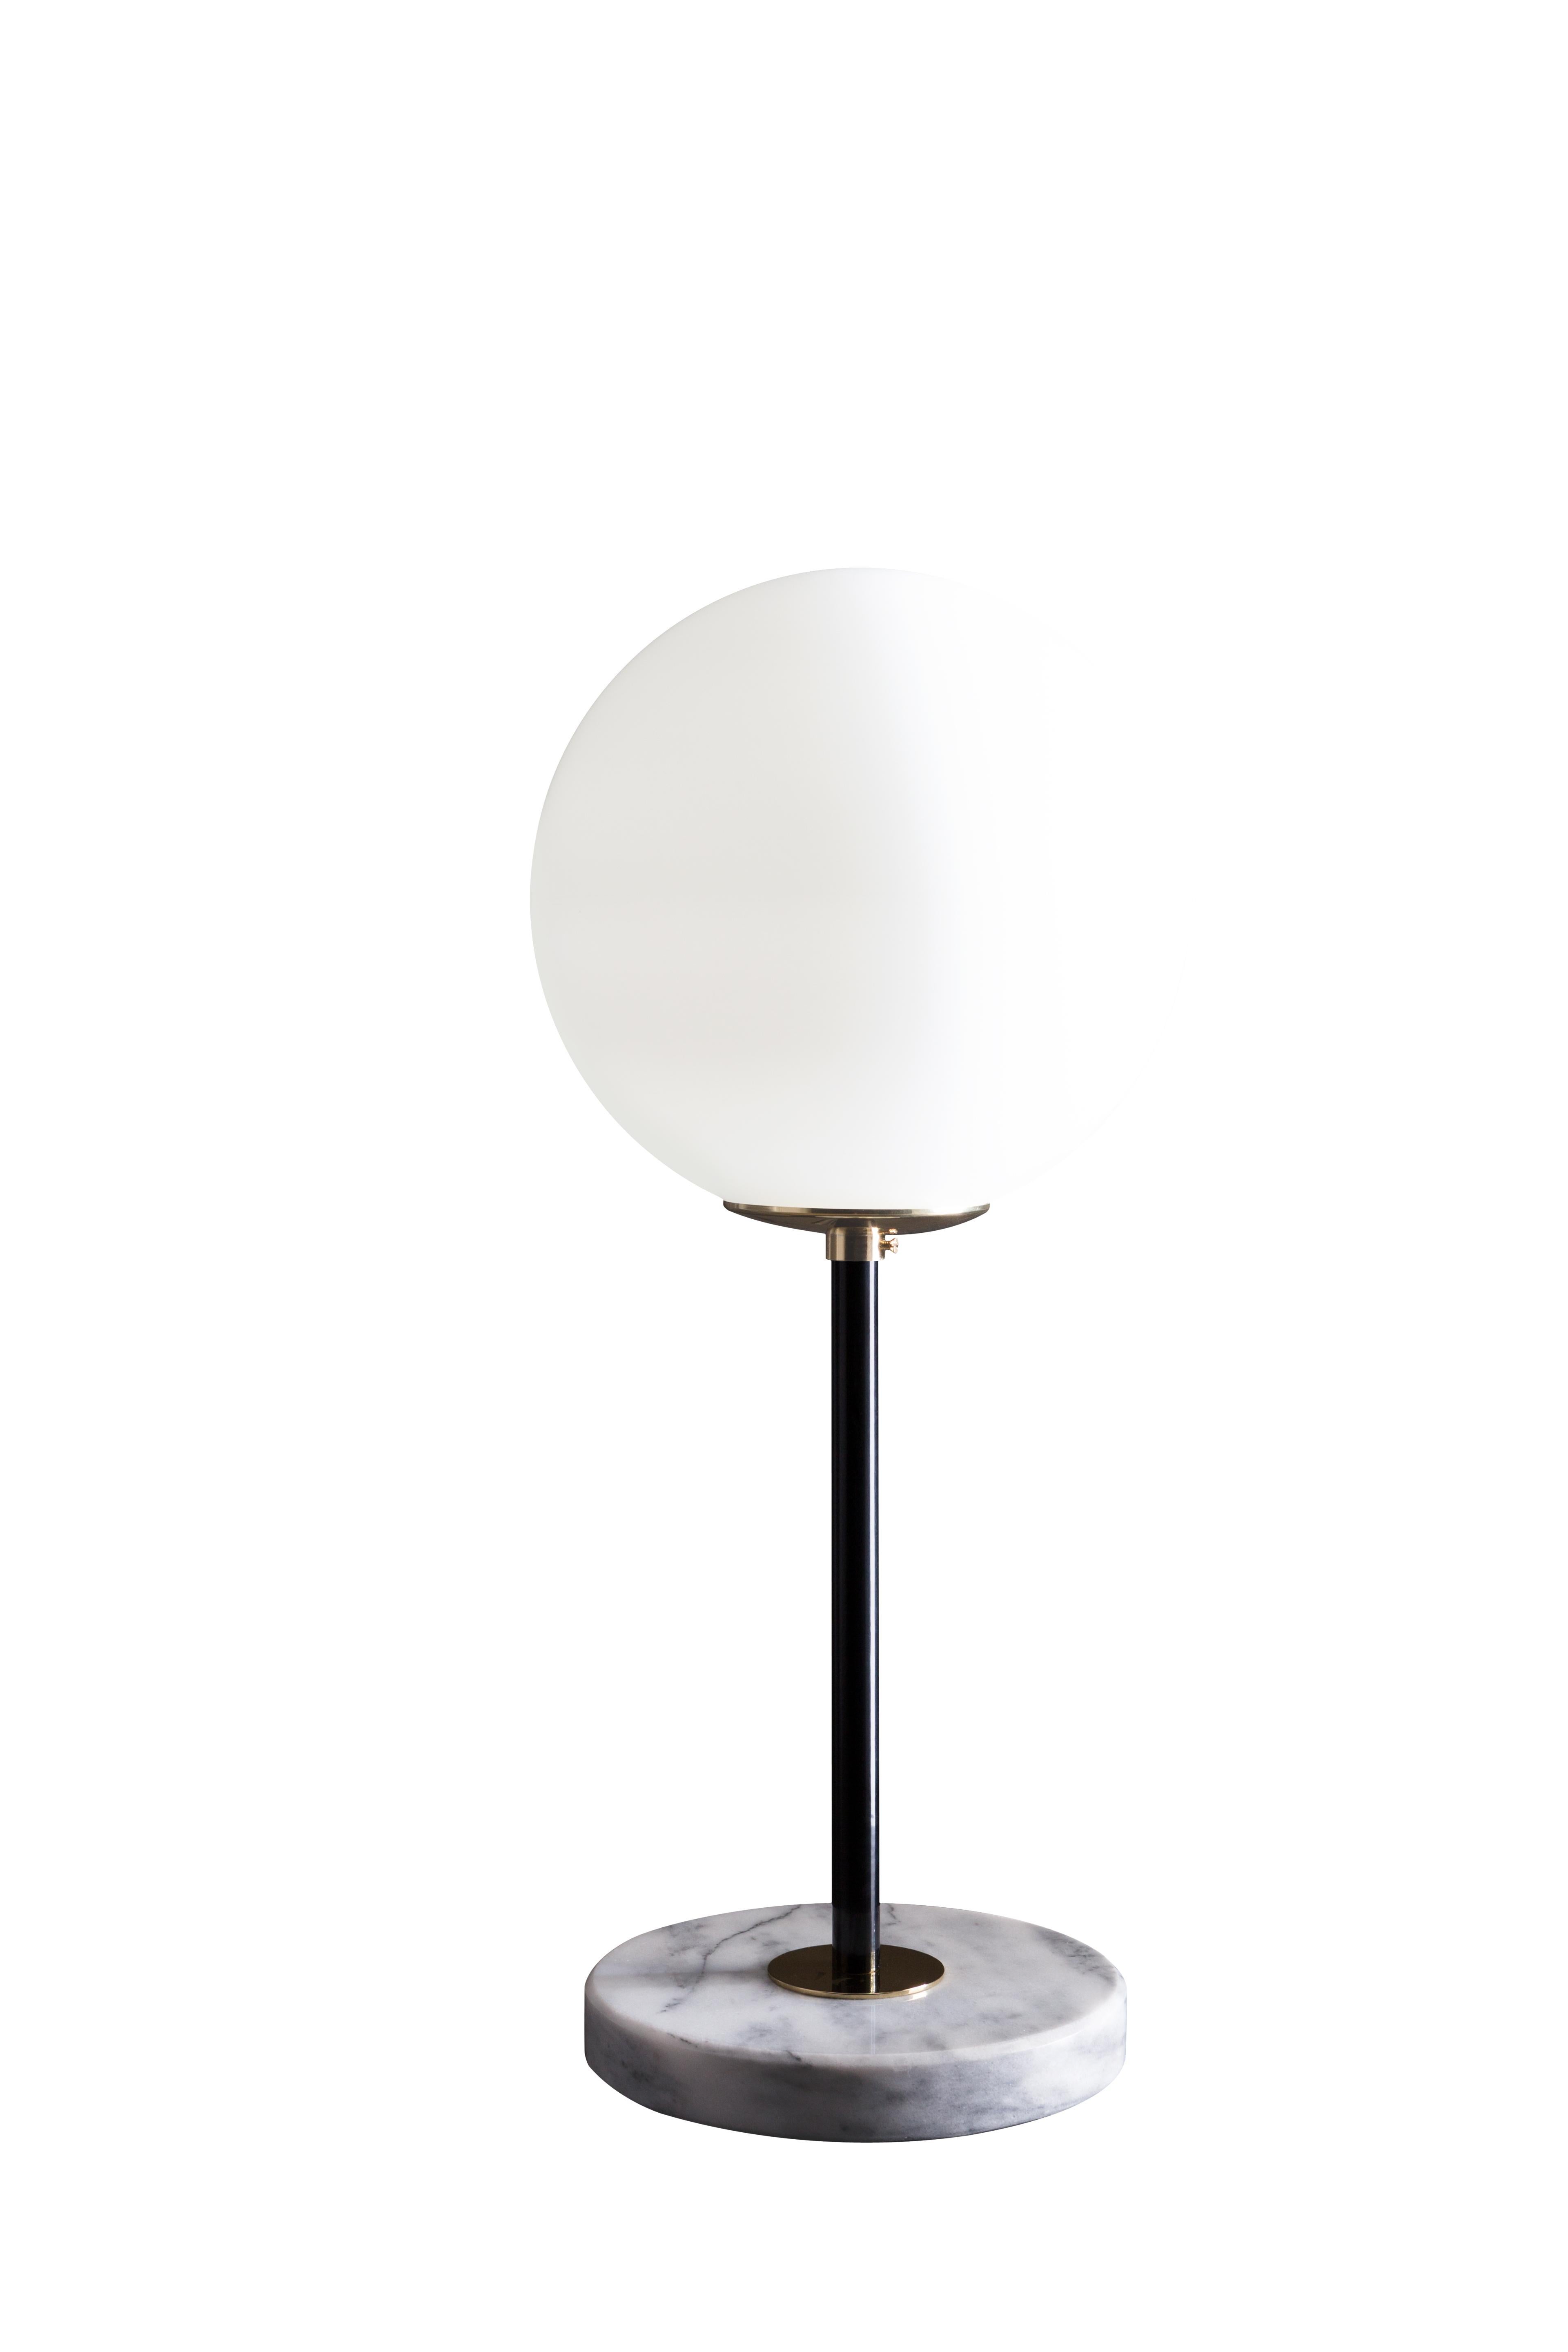 Black brass table lamp 06 by Magic Circus Editions
Dimensions: H 50 x W 22 cm
Materials: Smooth brass, mouth blown glass

Available Finishes: Brass, nickel
Available colors (central tube): Black, green pine, red wine, mustard yellow, and